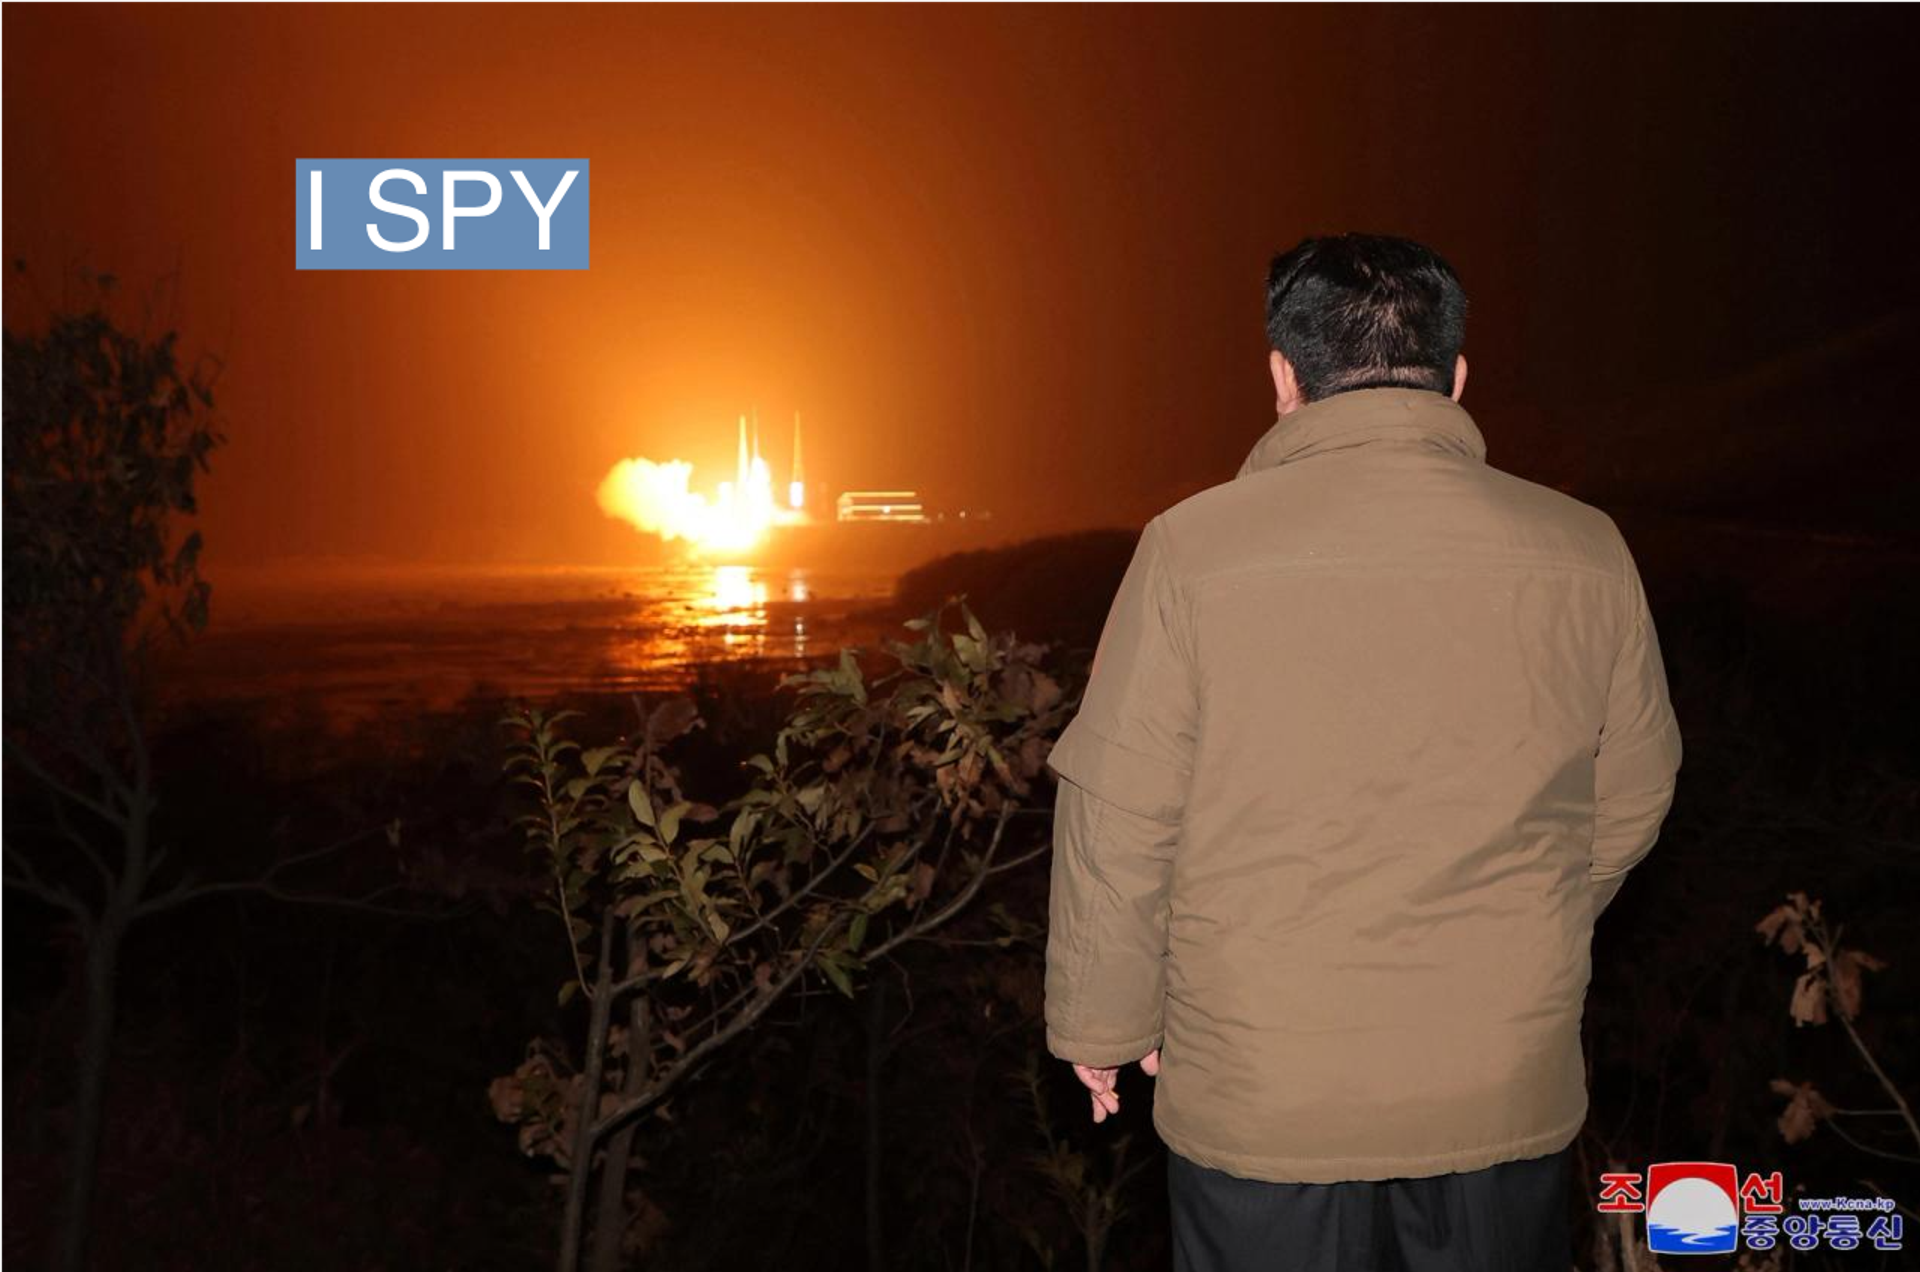 North Korean leader Kim Jong Un looks on as a rocket carrying a spy satellite Malligyong-1 is launched, as North Korean government claims, in a location given as North Gyeongsang Province, North Korea in this handout picture obtained by Reuters on November 21, 2023. KCNA via REUTERS